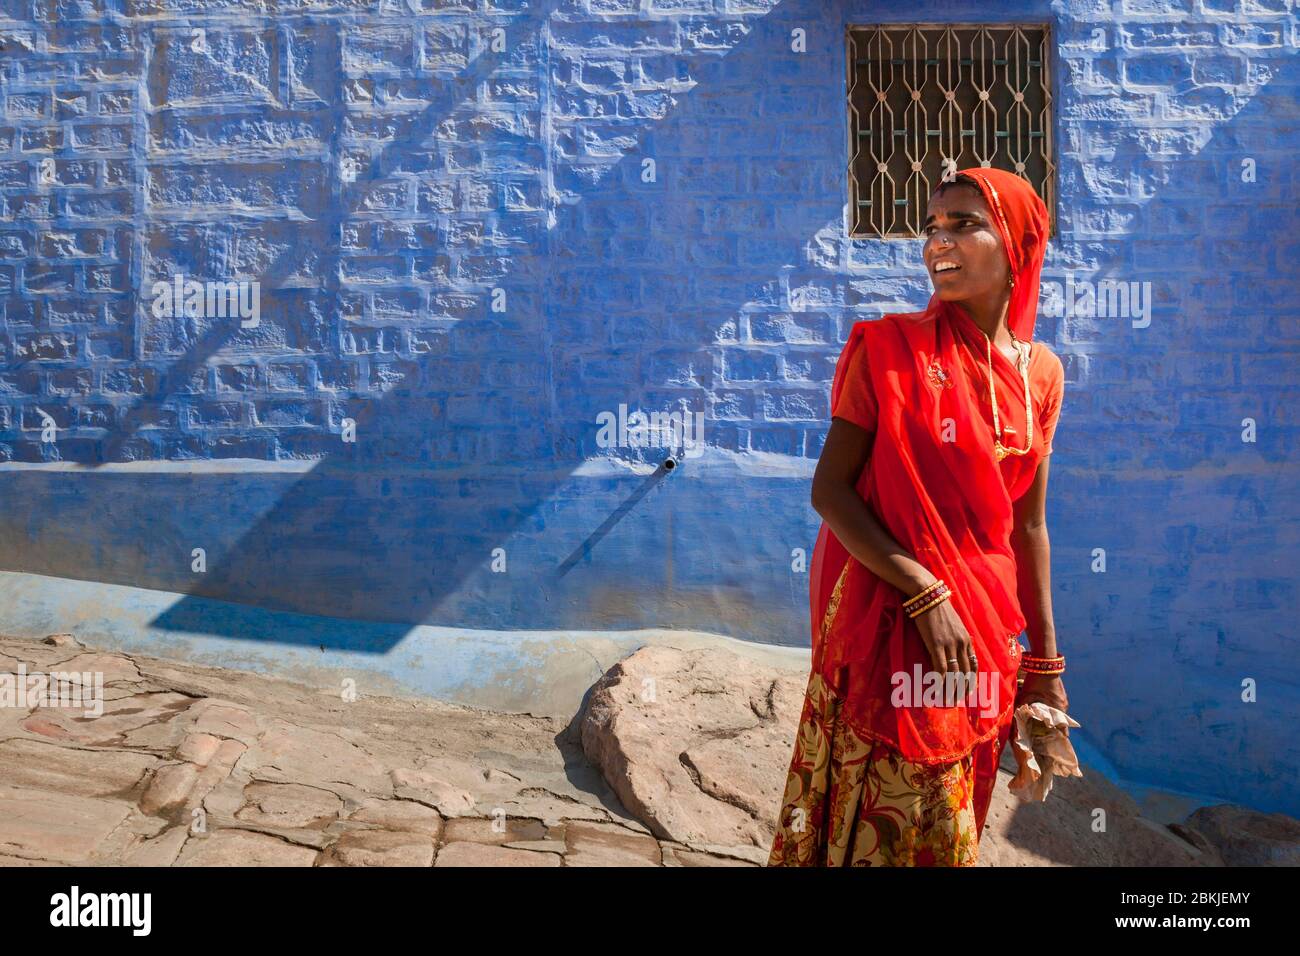 India, Rajasthan, Jodhpur, young woman in red sari walking by a blue house Stock Photo